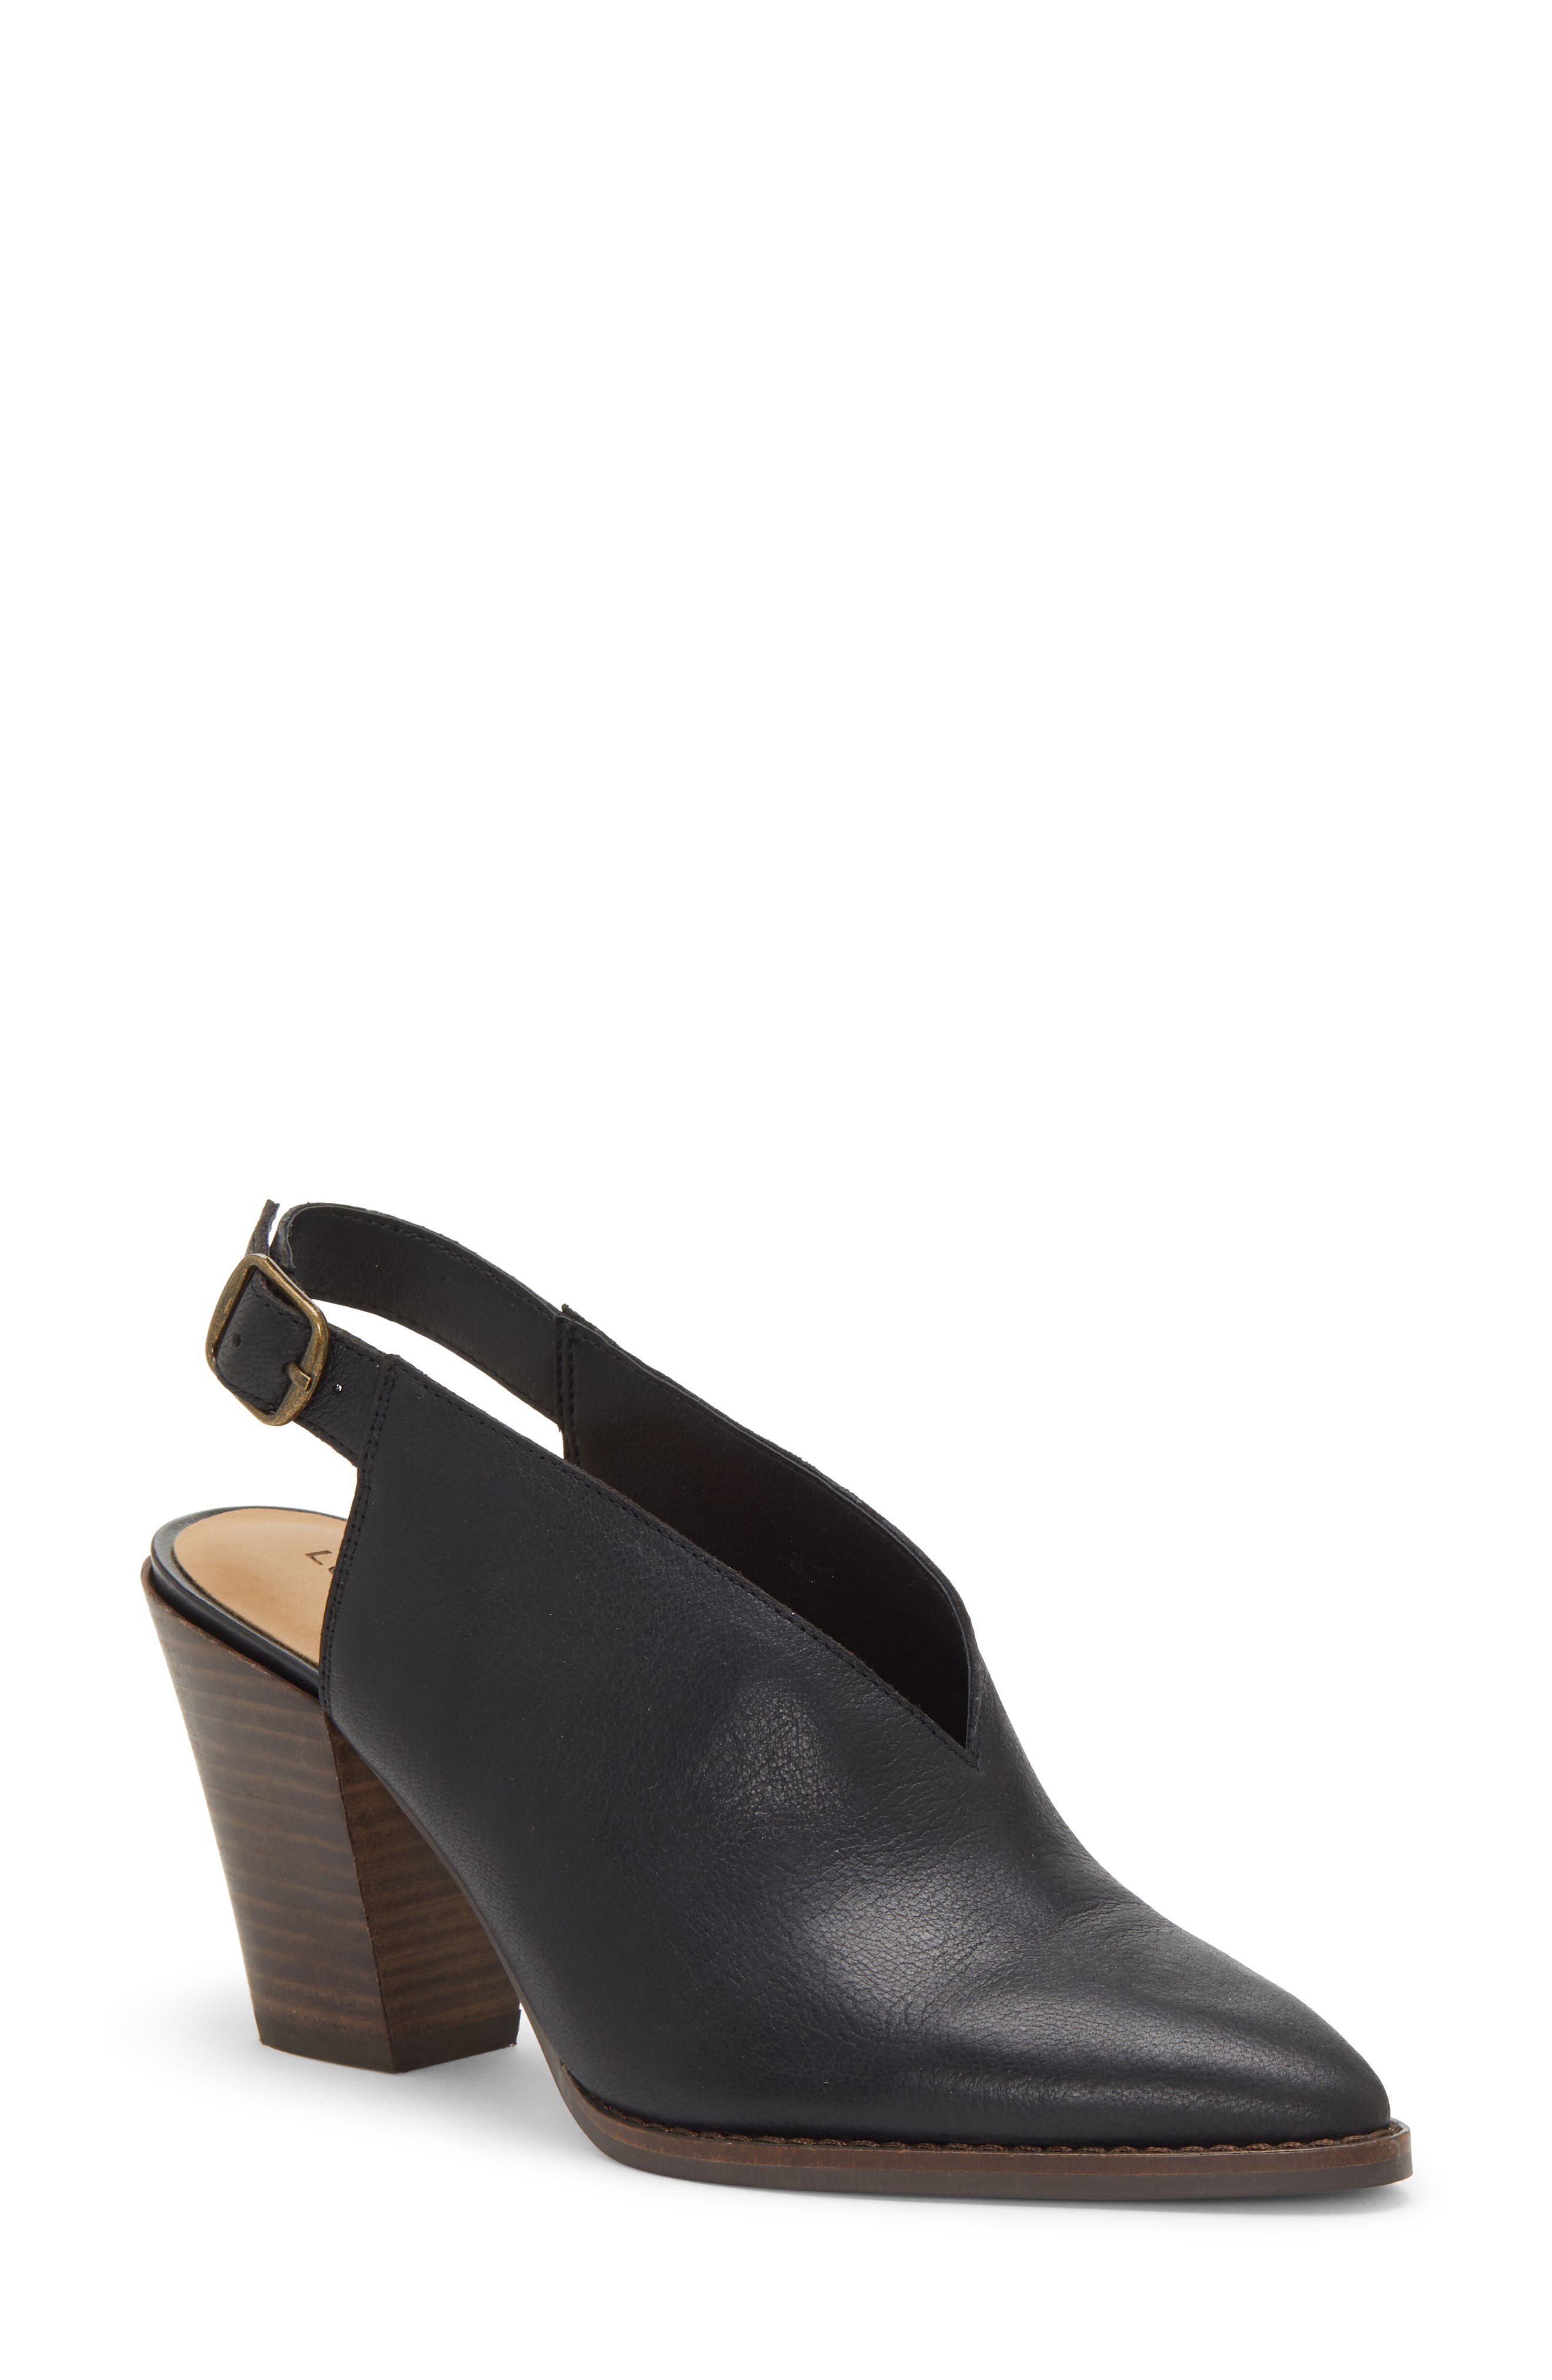 Lucky Brand Women's Shoes